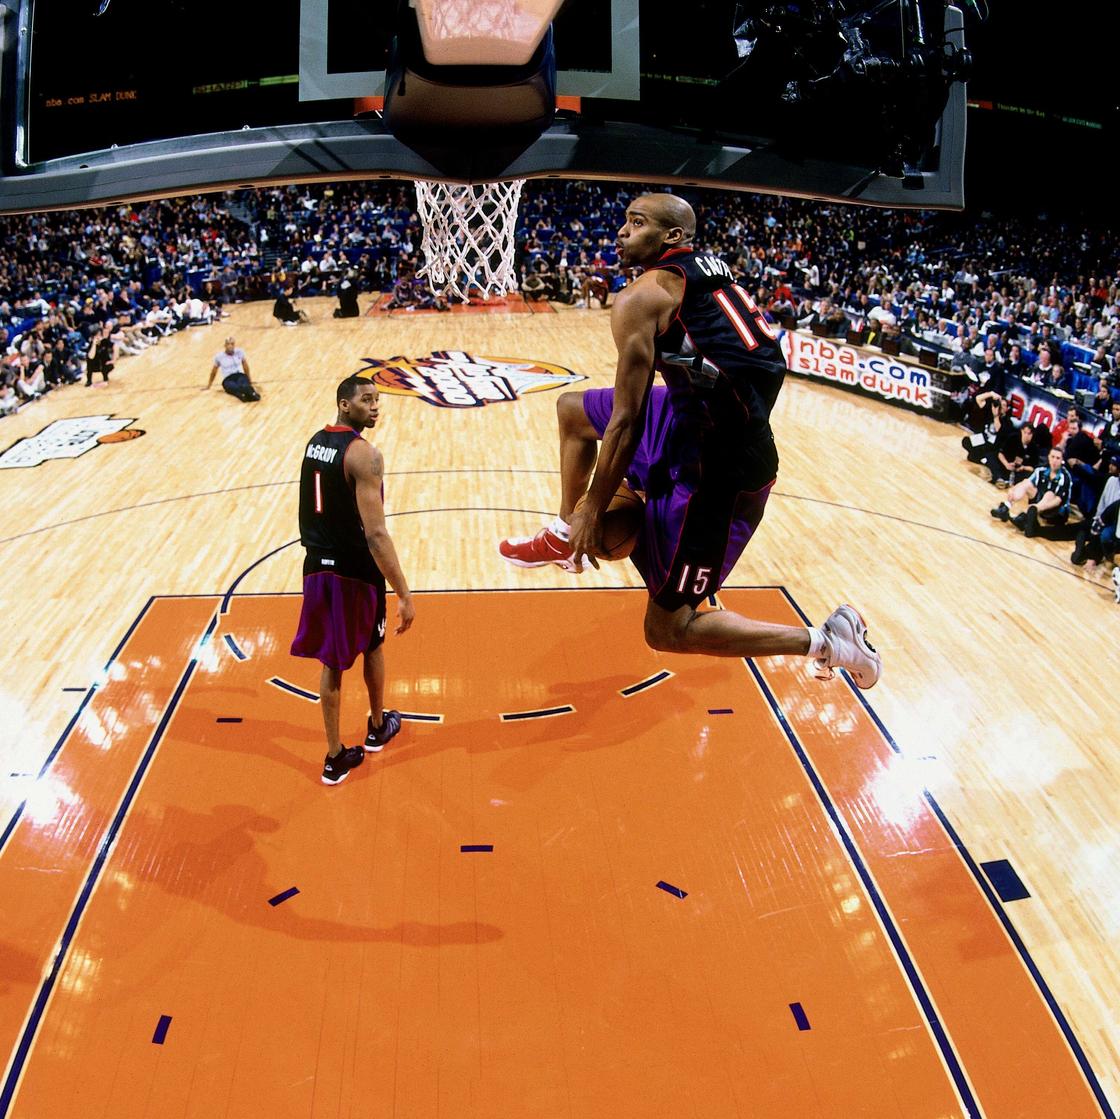 Vince Carter is the best dunker of all time.